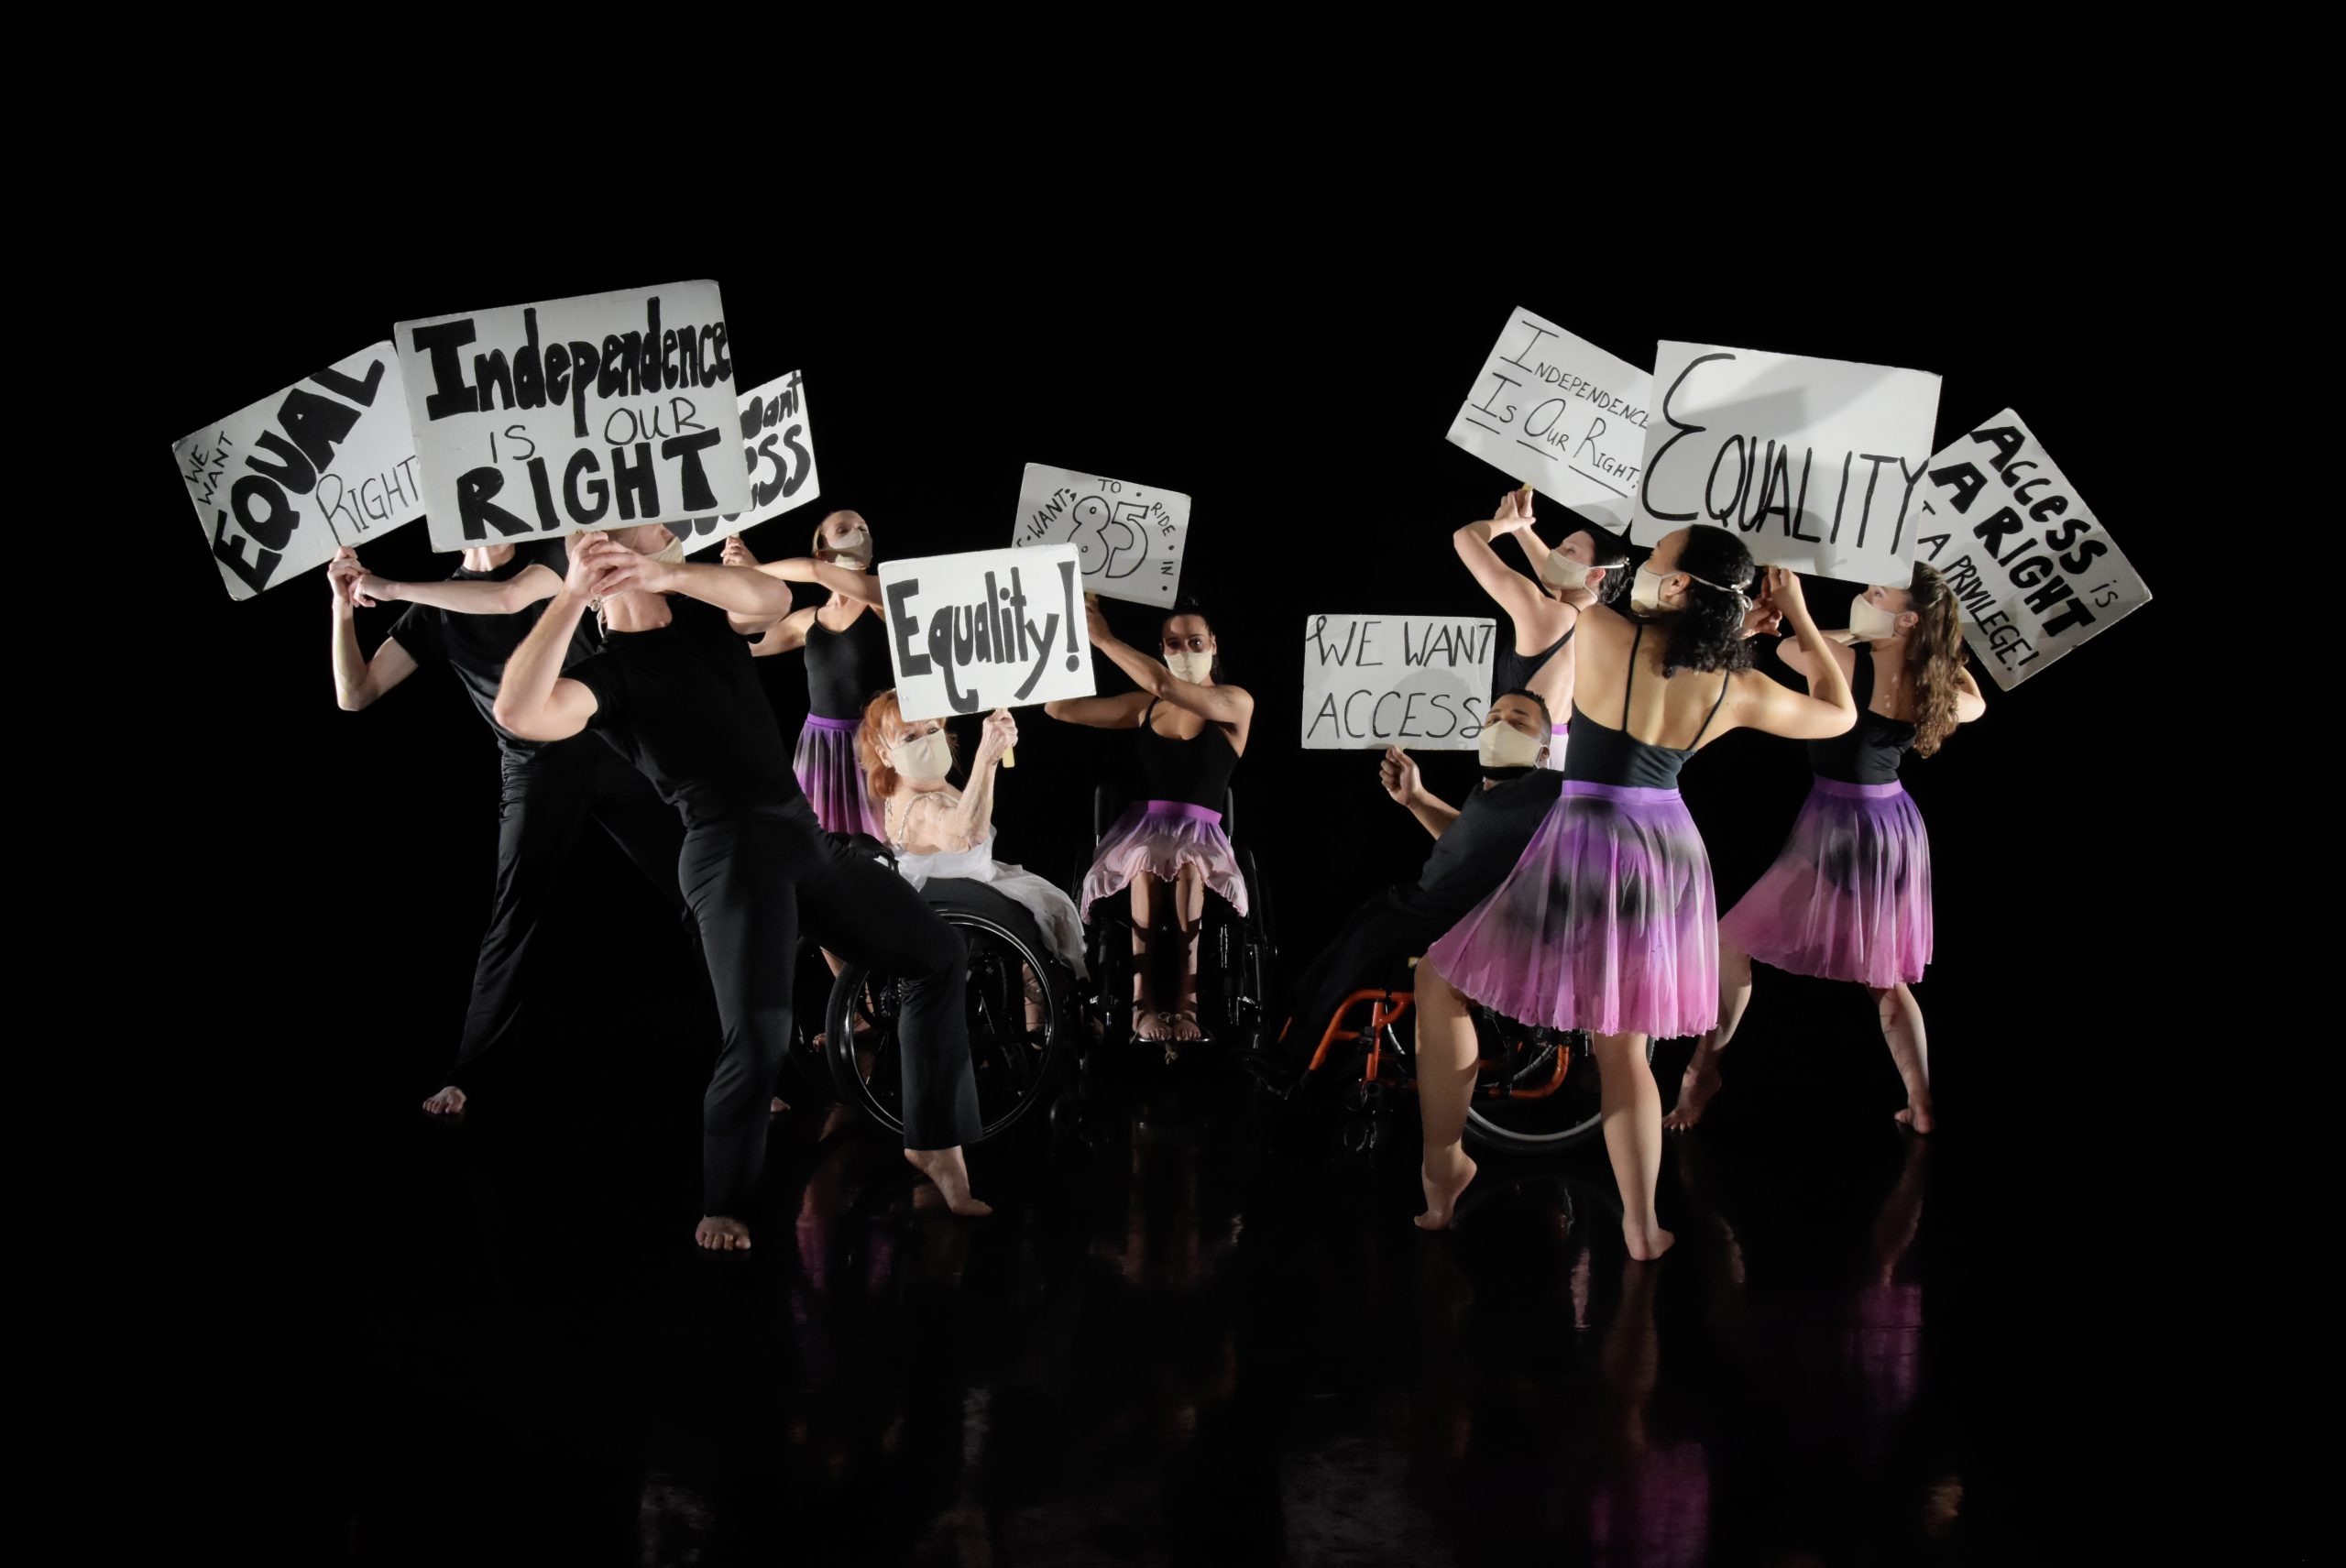 Dancing Wheels Company dancers hold signs that read Equality, We Want Access, and We Want to Ride in '85 as performed in Dancing On a Dream.